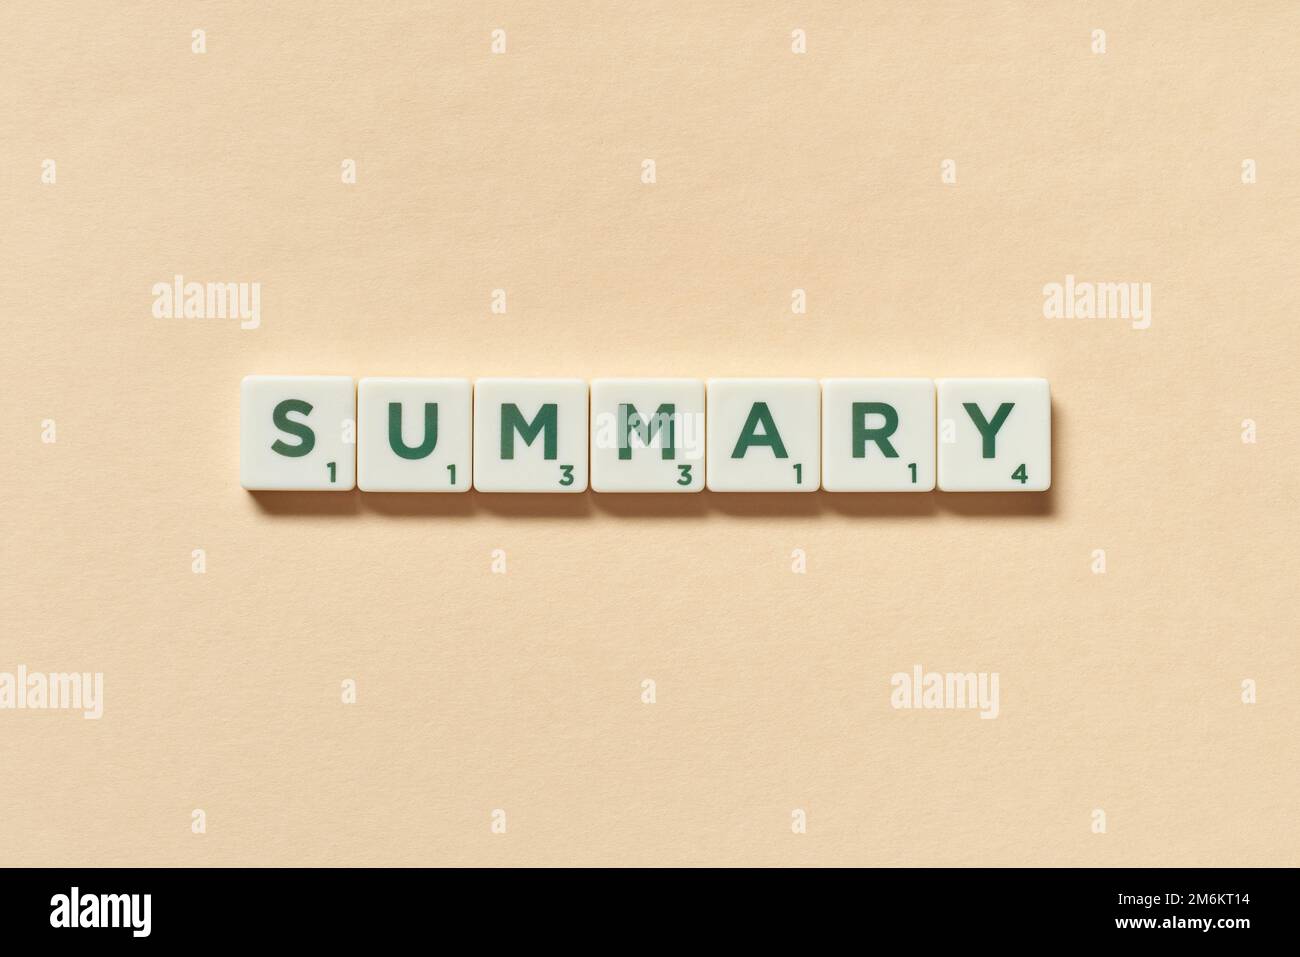 Summary formed of scrabble tiles on beige background. Stock Photo